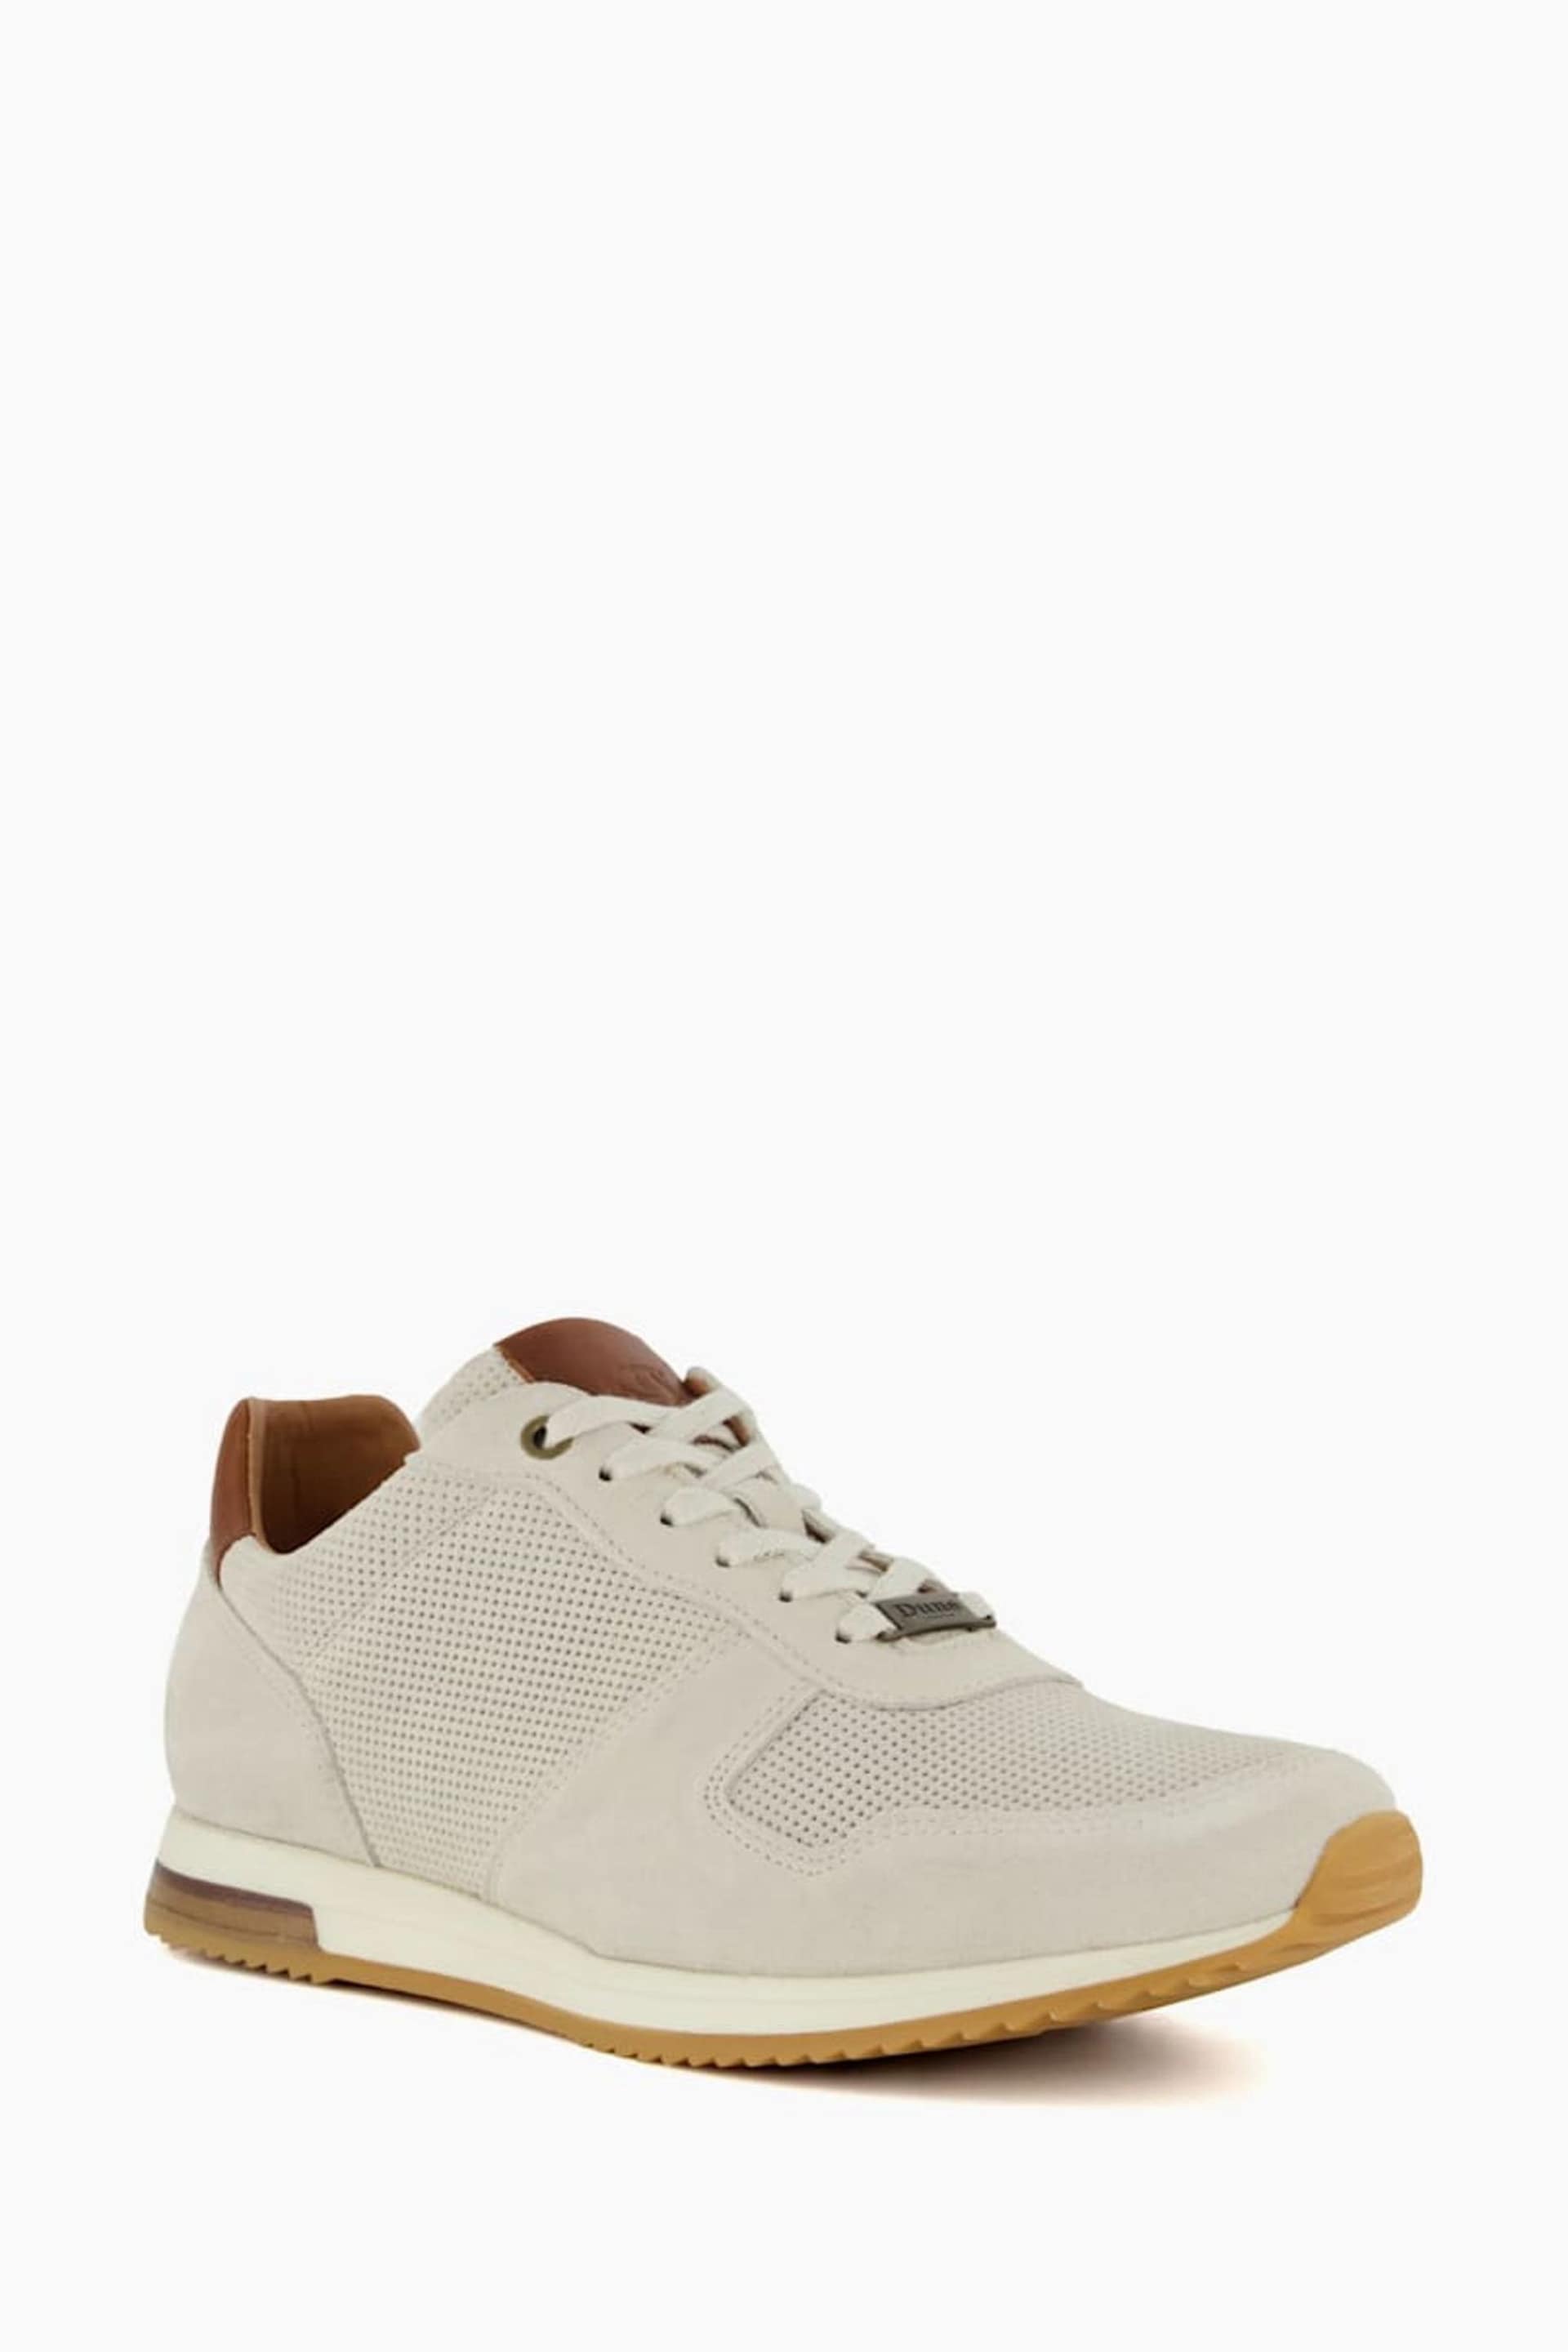 Dune London White Trilogy Perforated Runner Trainers - Image 3 of 5